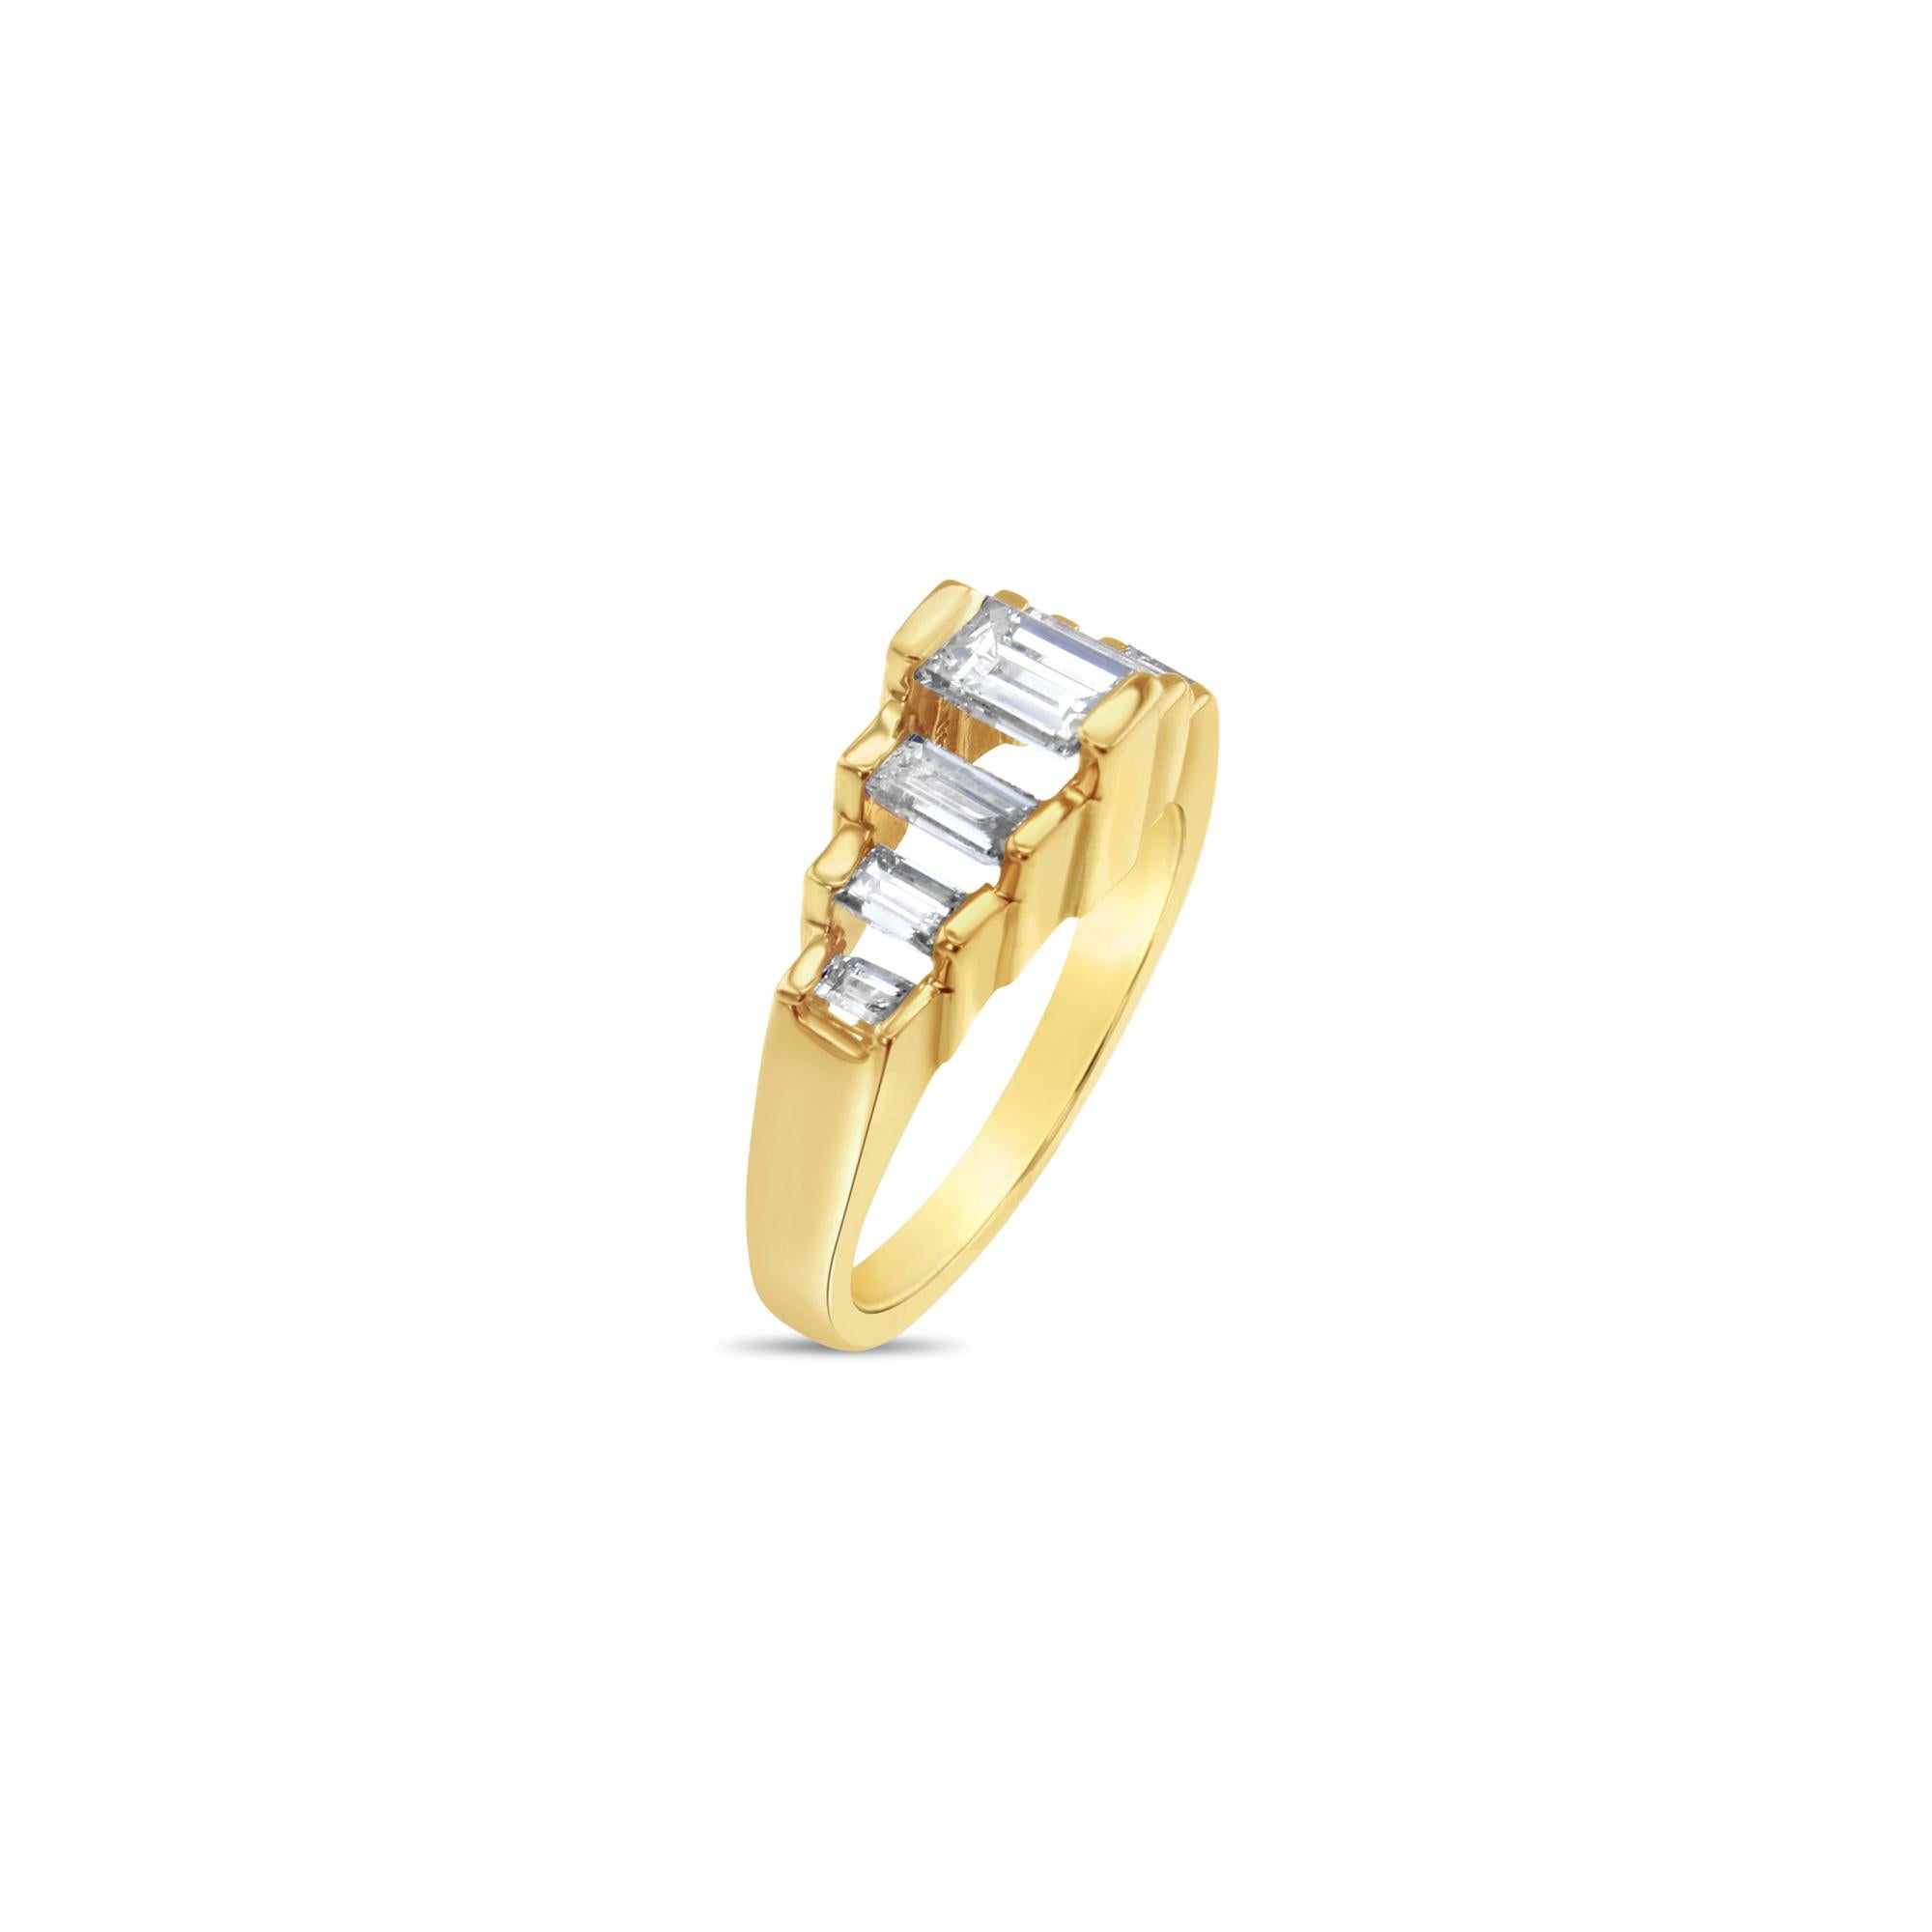 ♥ Ring Summary  ♥

Main Stone: Diamond
Approx. Carat Weight: 1.25cttw
Diamond Clarity: VS2
Diamond Color: G
Band Material: 14k Yellow Gold
Stone Cut: Baguette
Dimensions: 7mm x 17mm 
Weight: 5 grams 